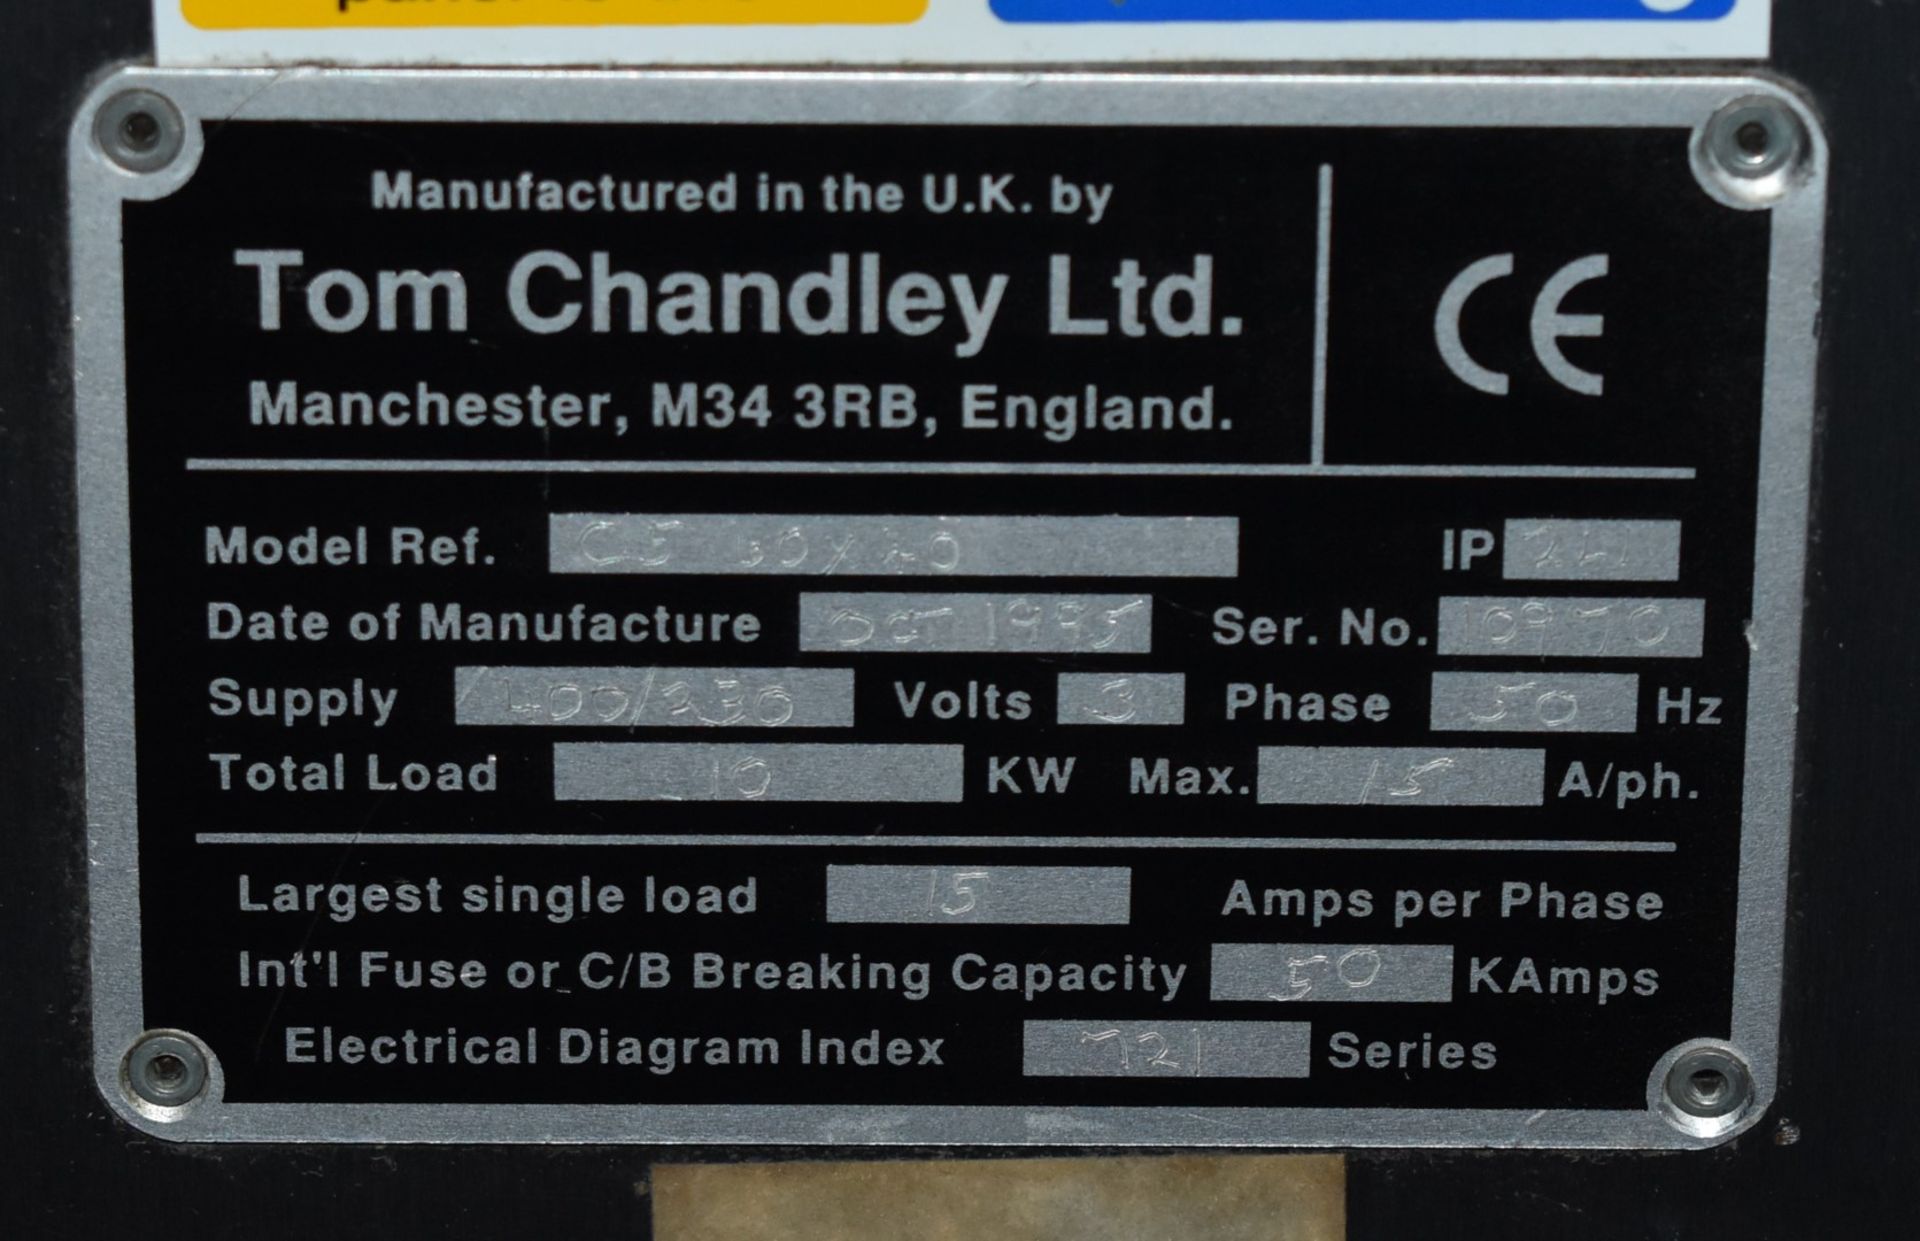 1 x Tom Chandley Double C5 60X40 Pie Oven With Stainless Steel Baking Tray Prep Bench - CL455 - - Image 10 of 18